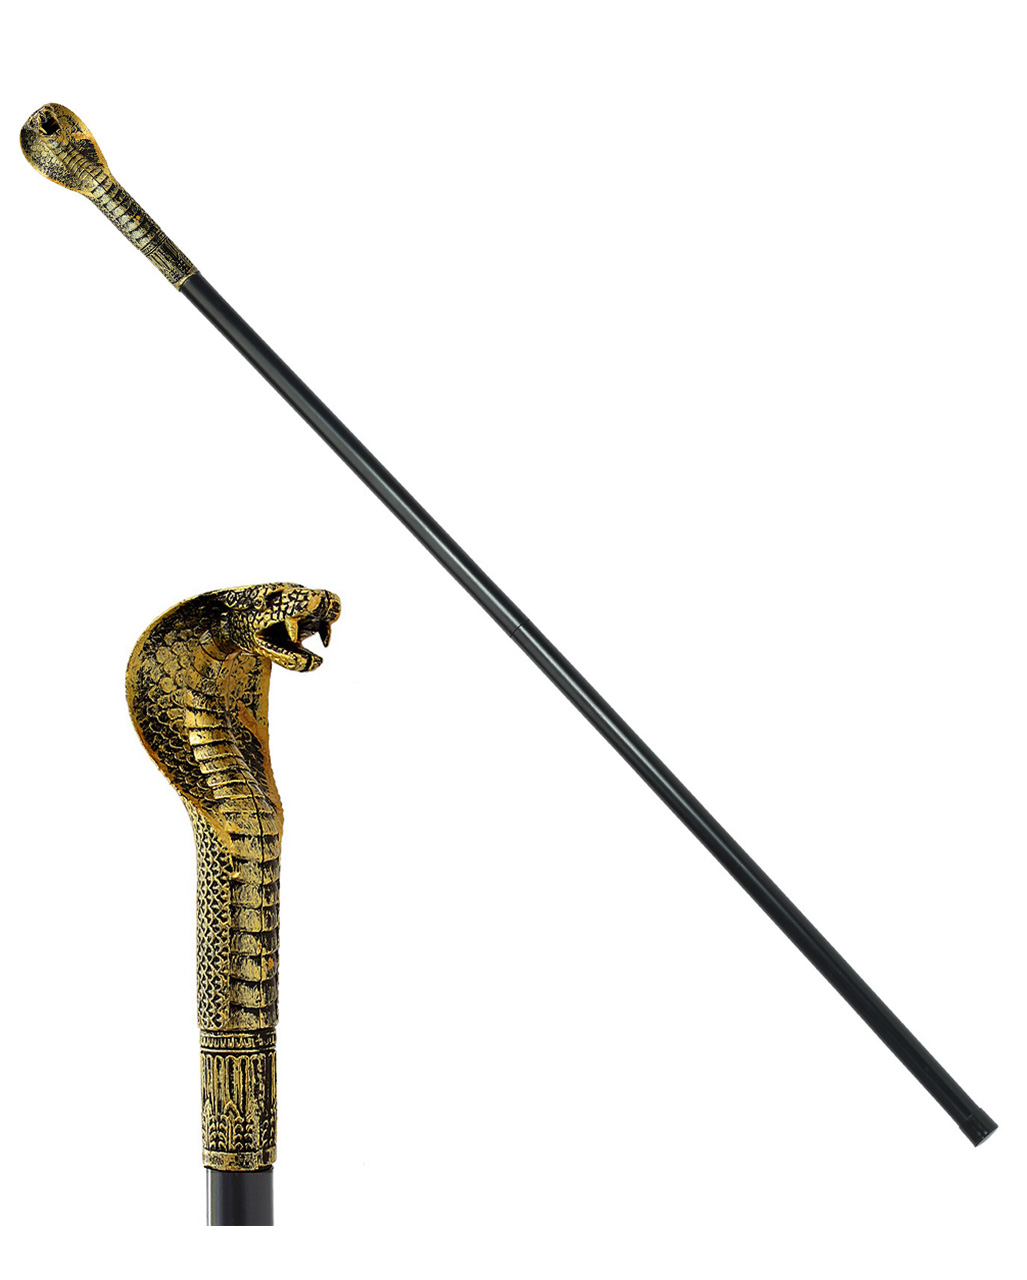 Lego Pharaoh Wand in Pearl Gold Snake Sceptre 90390 Weapon Disney JAFRA NEW 